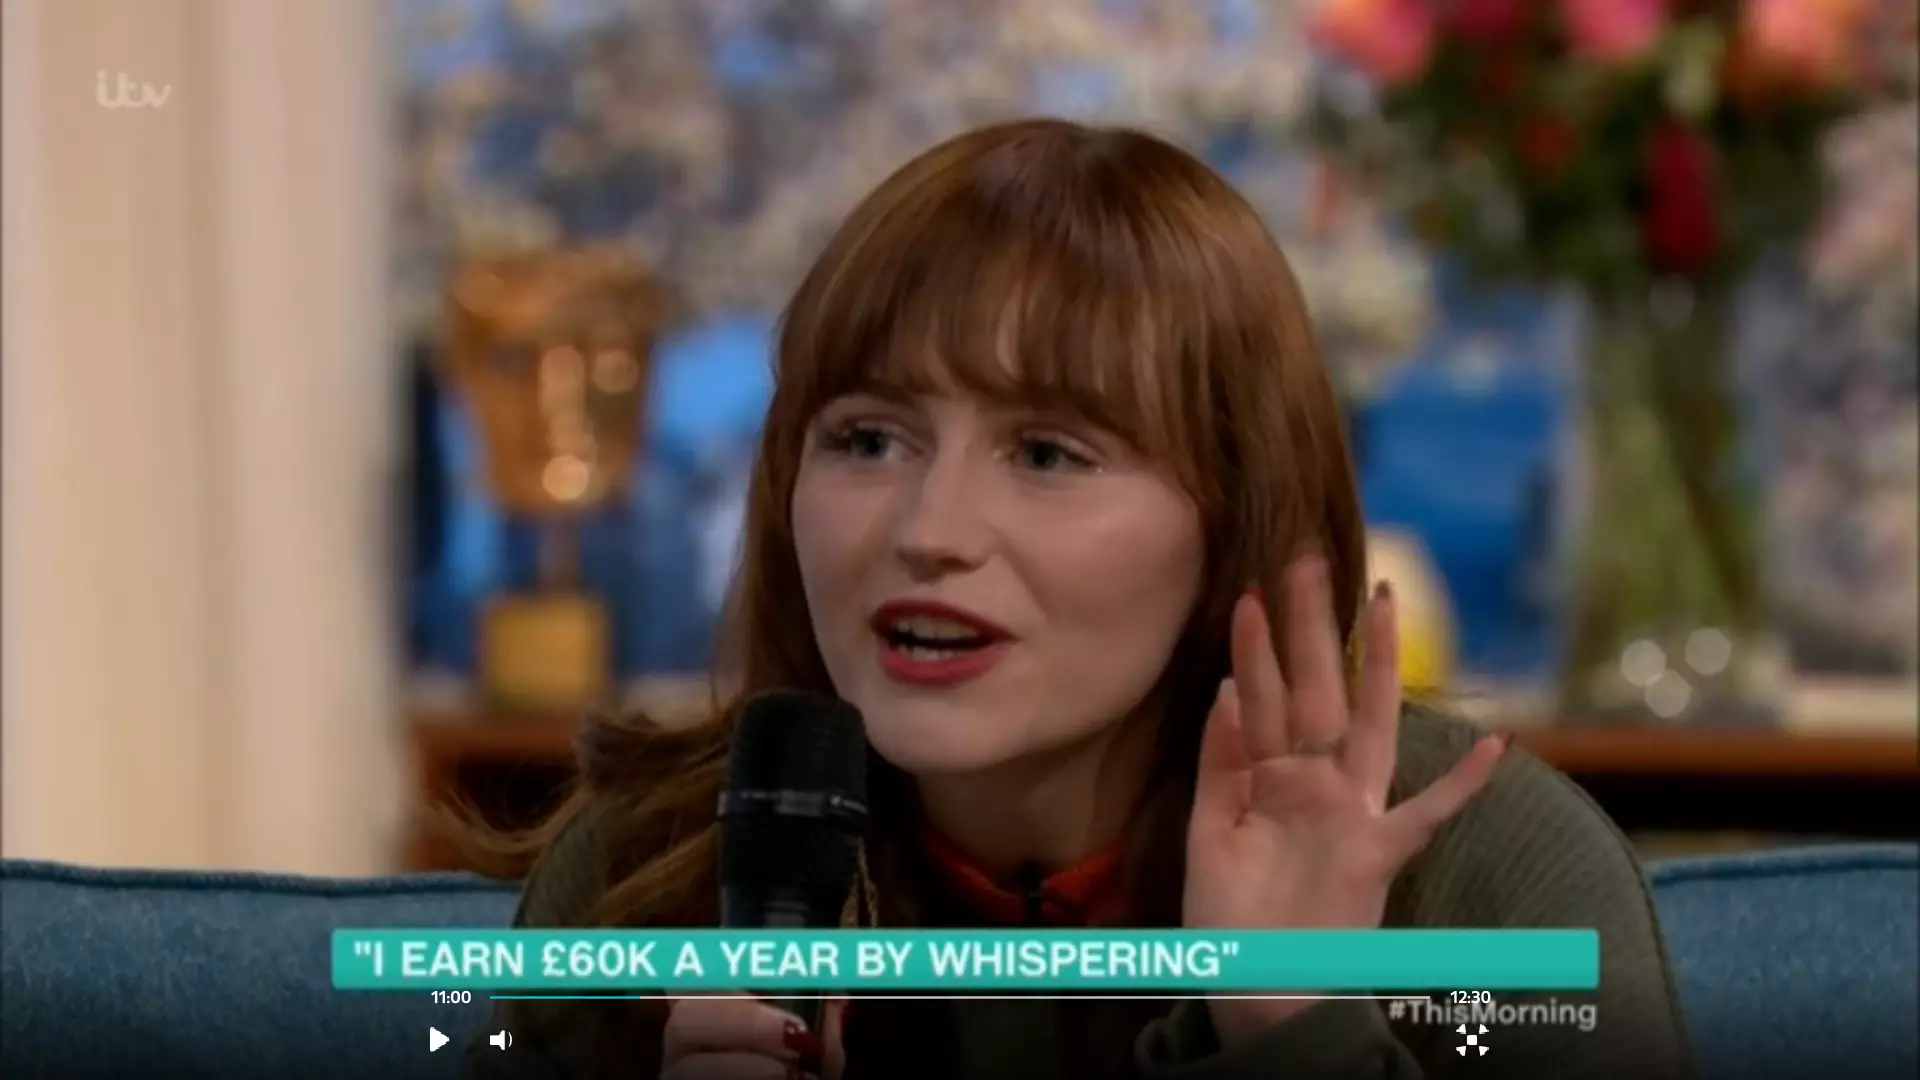 Sophie The Whispering Girl on This Morning.